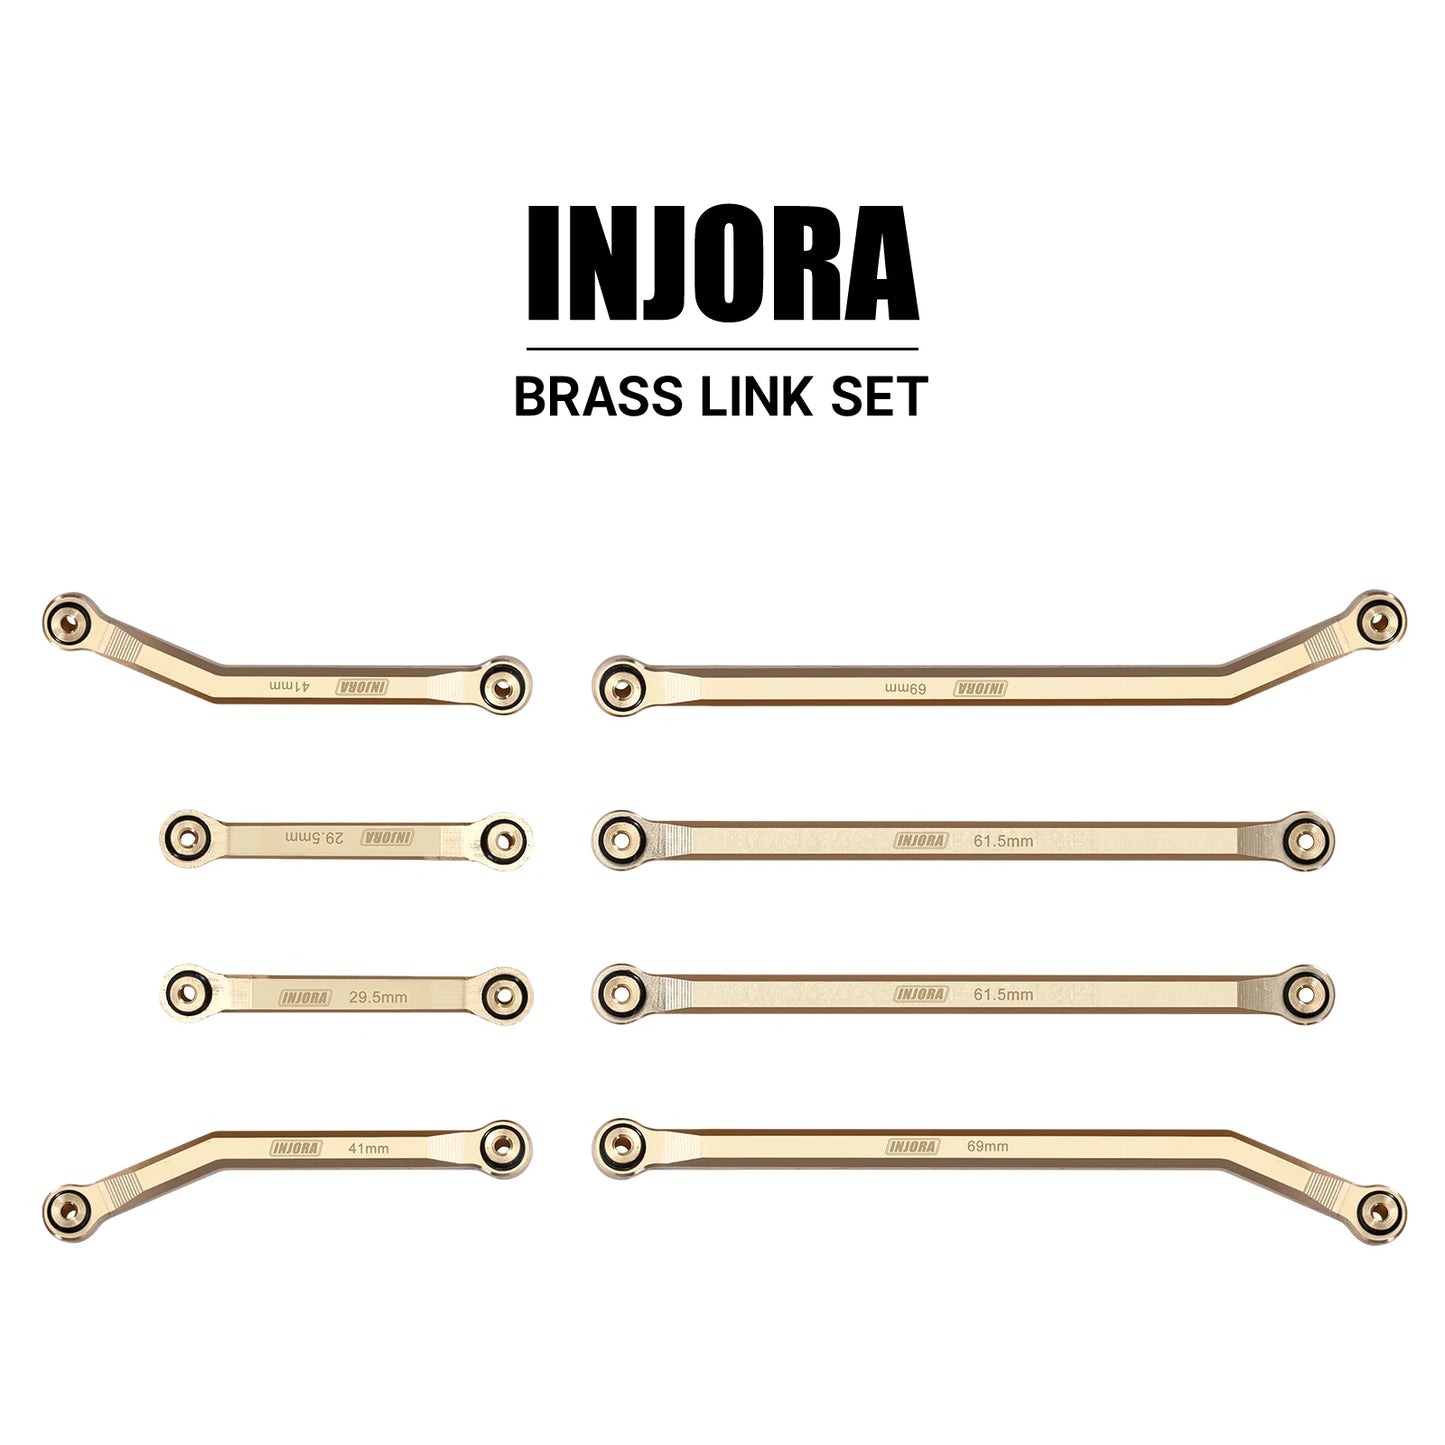 INJORA 36g Heavy Brass High Clearance Chassis 4 Links Set for 1/24 RC Crawler Car Axial SCX24 Deadbolt AXI90081 B17 AXI00004